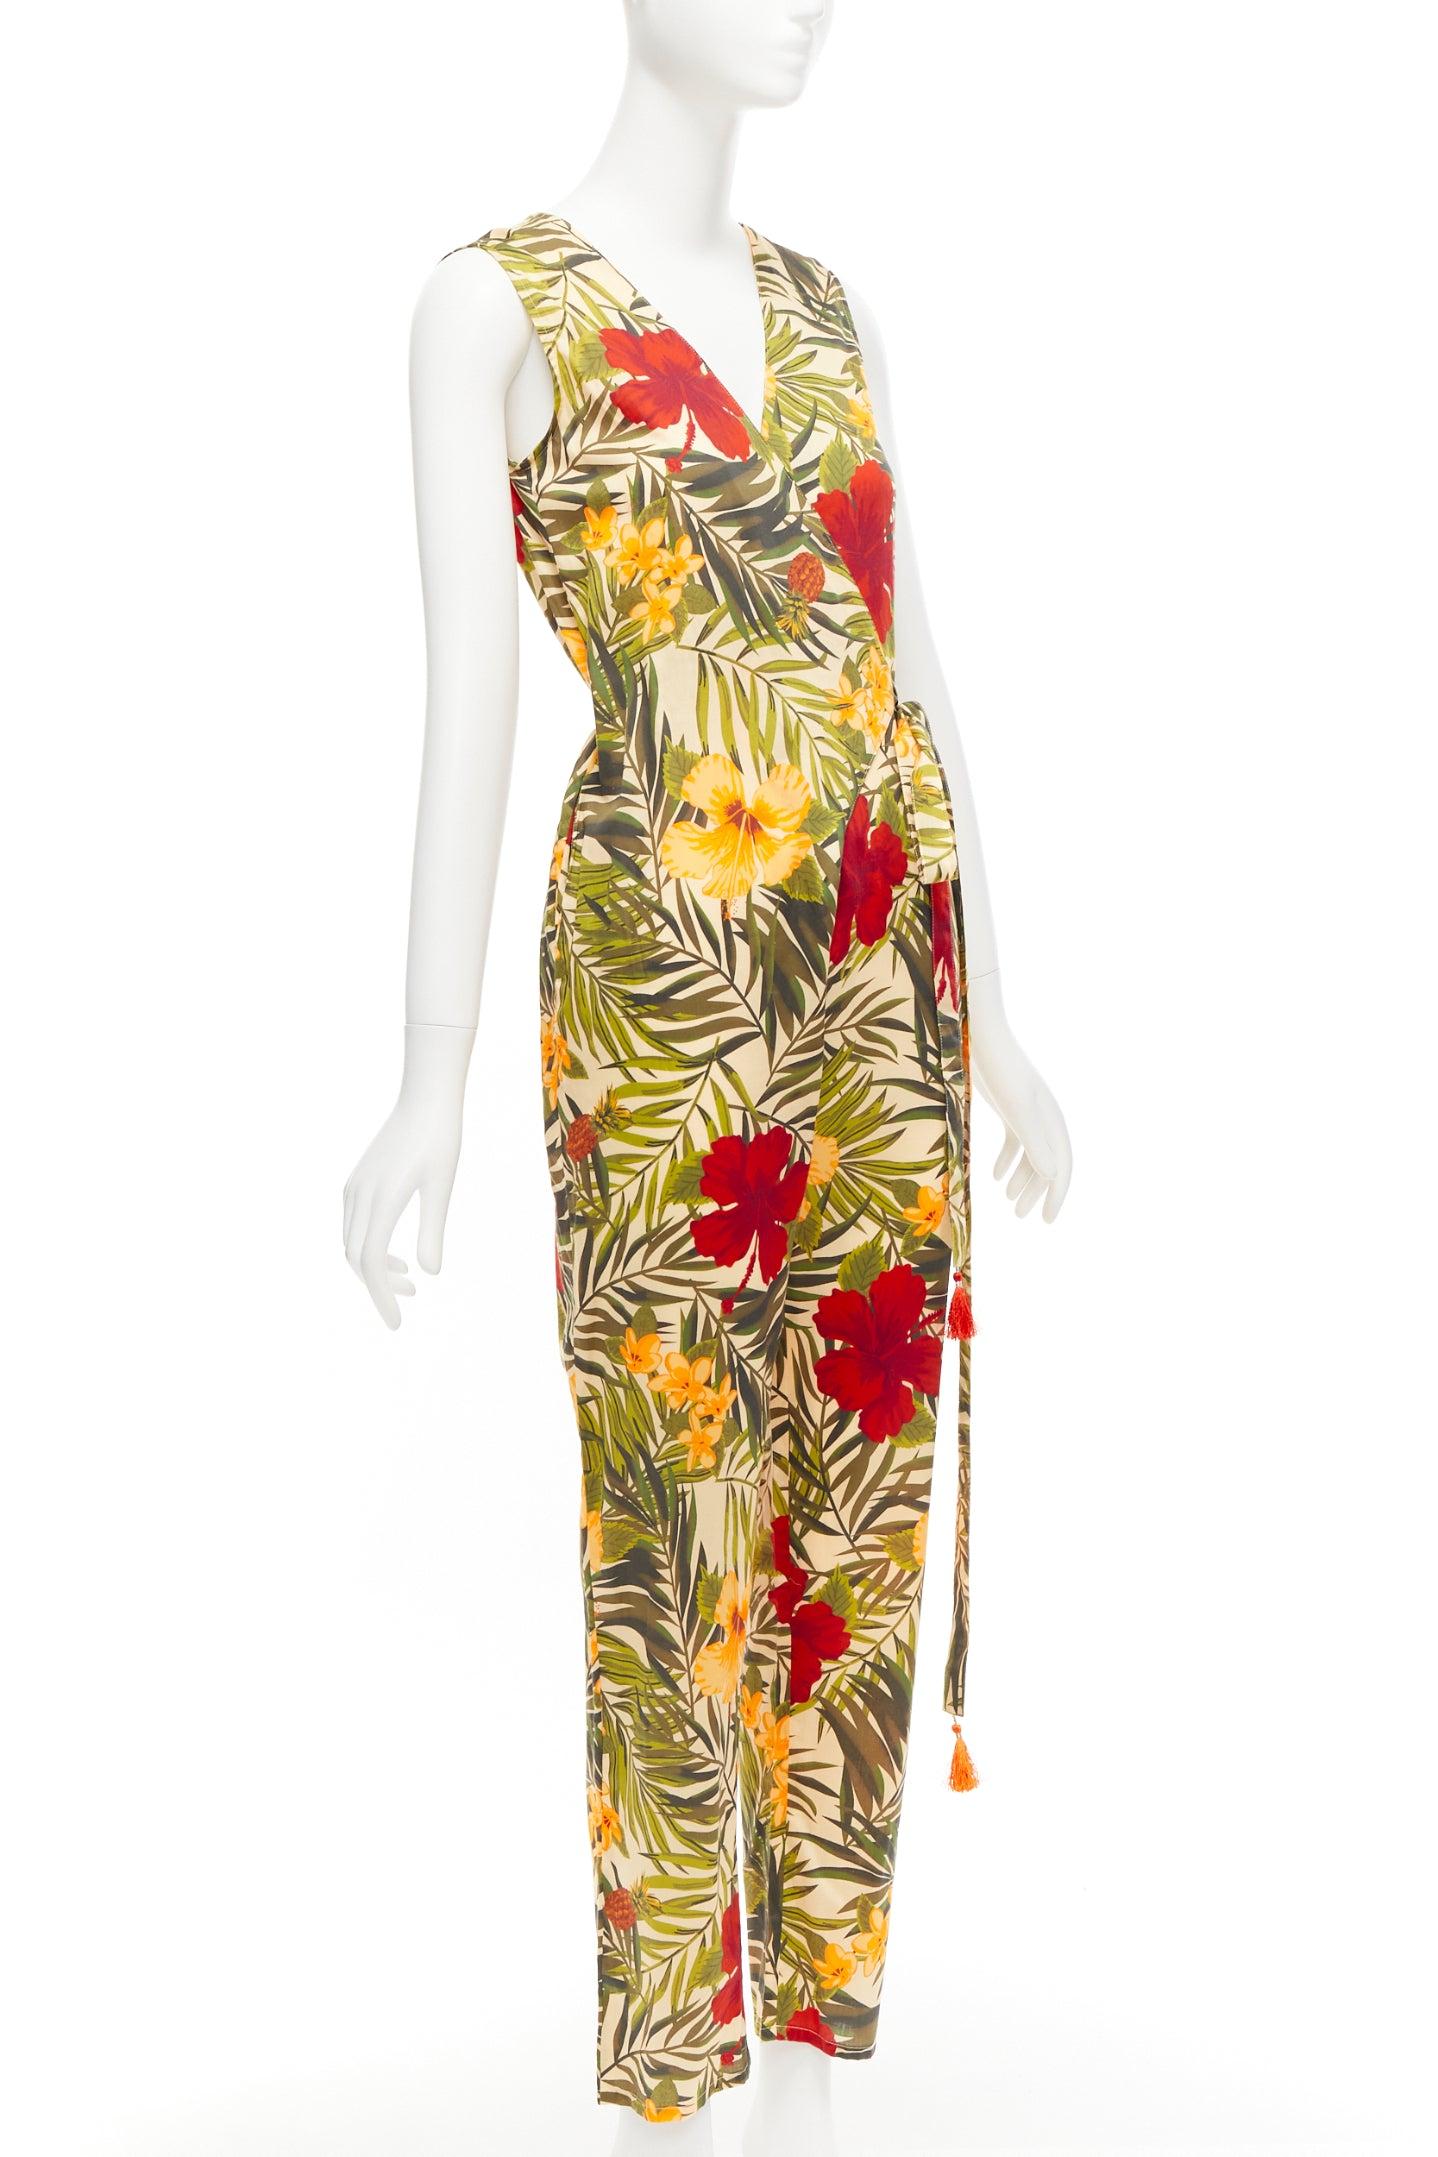 MIGUELINA red yellow green tropical floral print wrap jumpsuit XS
Reference: CELG/A00385
Brand: Miguelina
Material: Cotton
Color: Multicolour
Pattern: Floral
Closure: Wrap Tie
Made in: China

CONDITION:
Condition: Excellent, this item was pre-owned